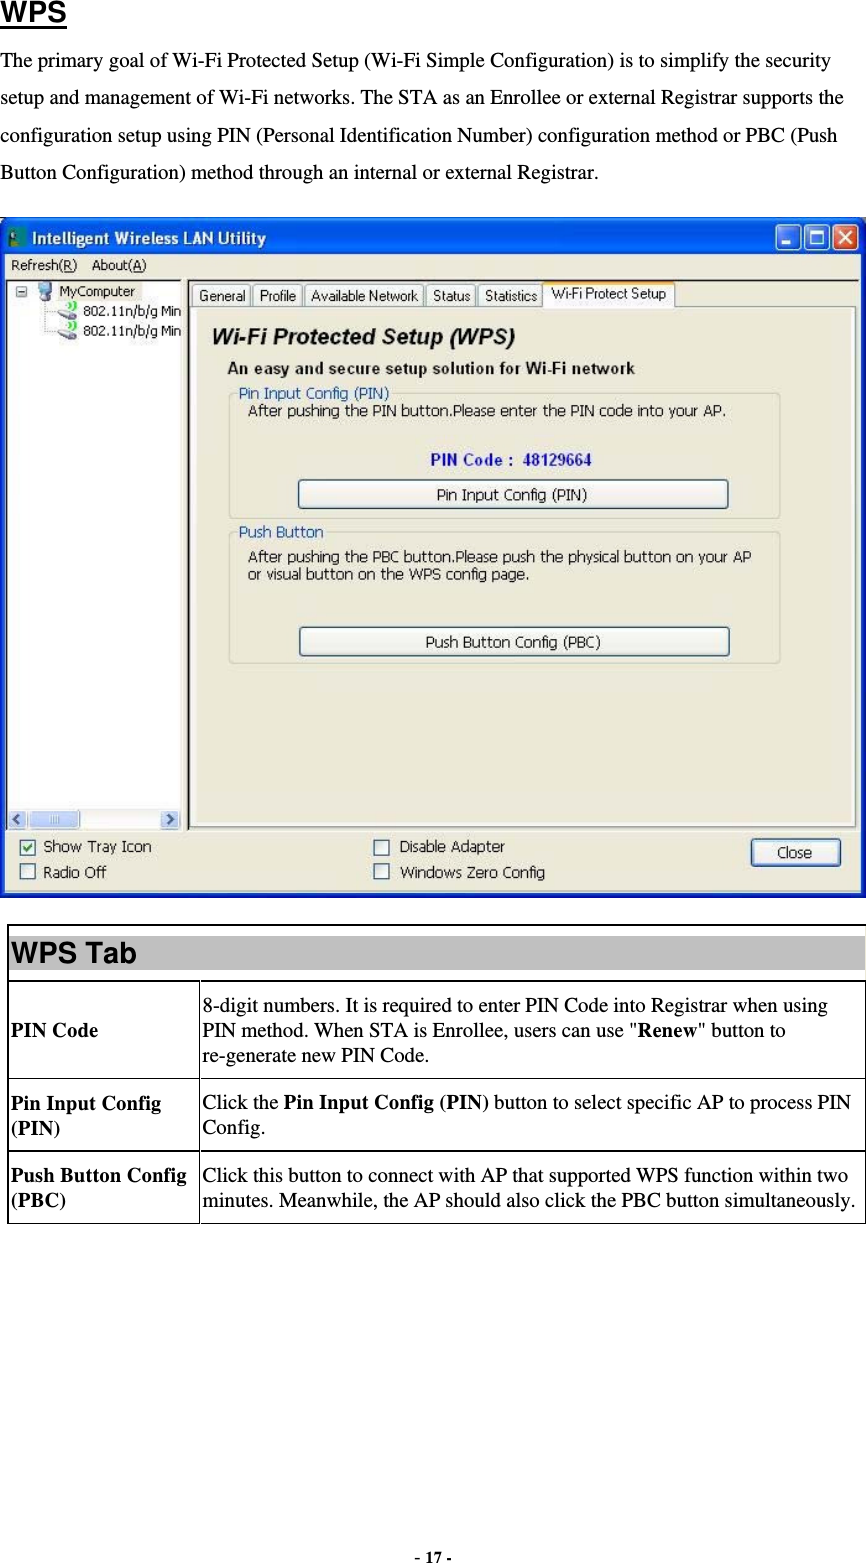  - 17 - WPS The primary goal of Wi-Fi Protected Setup (Wi-Fi Simple Configuration) is to simplify the security setup and management of Wi-Fi networks. The STA as an Enrollee or external Registrar supports the configuration setup using PIN (Personal Identification Number) configuration method or PBC (Push Button Configuration) method through an internal or external Registrar.  WPS Tab PIN Code 8-digit numbers. It is required to enter PIN Code into Registrar when using PIN method. When STA is Enrollee, users can use &quot;Renew&quot; button to re-generate new PIN Code. Pin Input Config (PIN) Click the Pin Input Config (PIN) button to select specific AP to process PIN Config. Push Button Config (PBC) Click this button to connect with AP that supported WPS function within two minutes. Meanwhile, the AP should also click the PBC button simultaneously. 